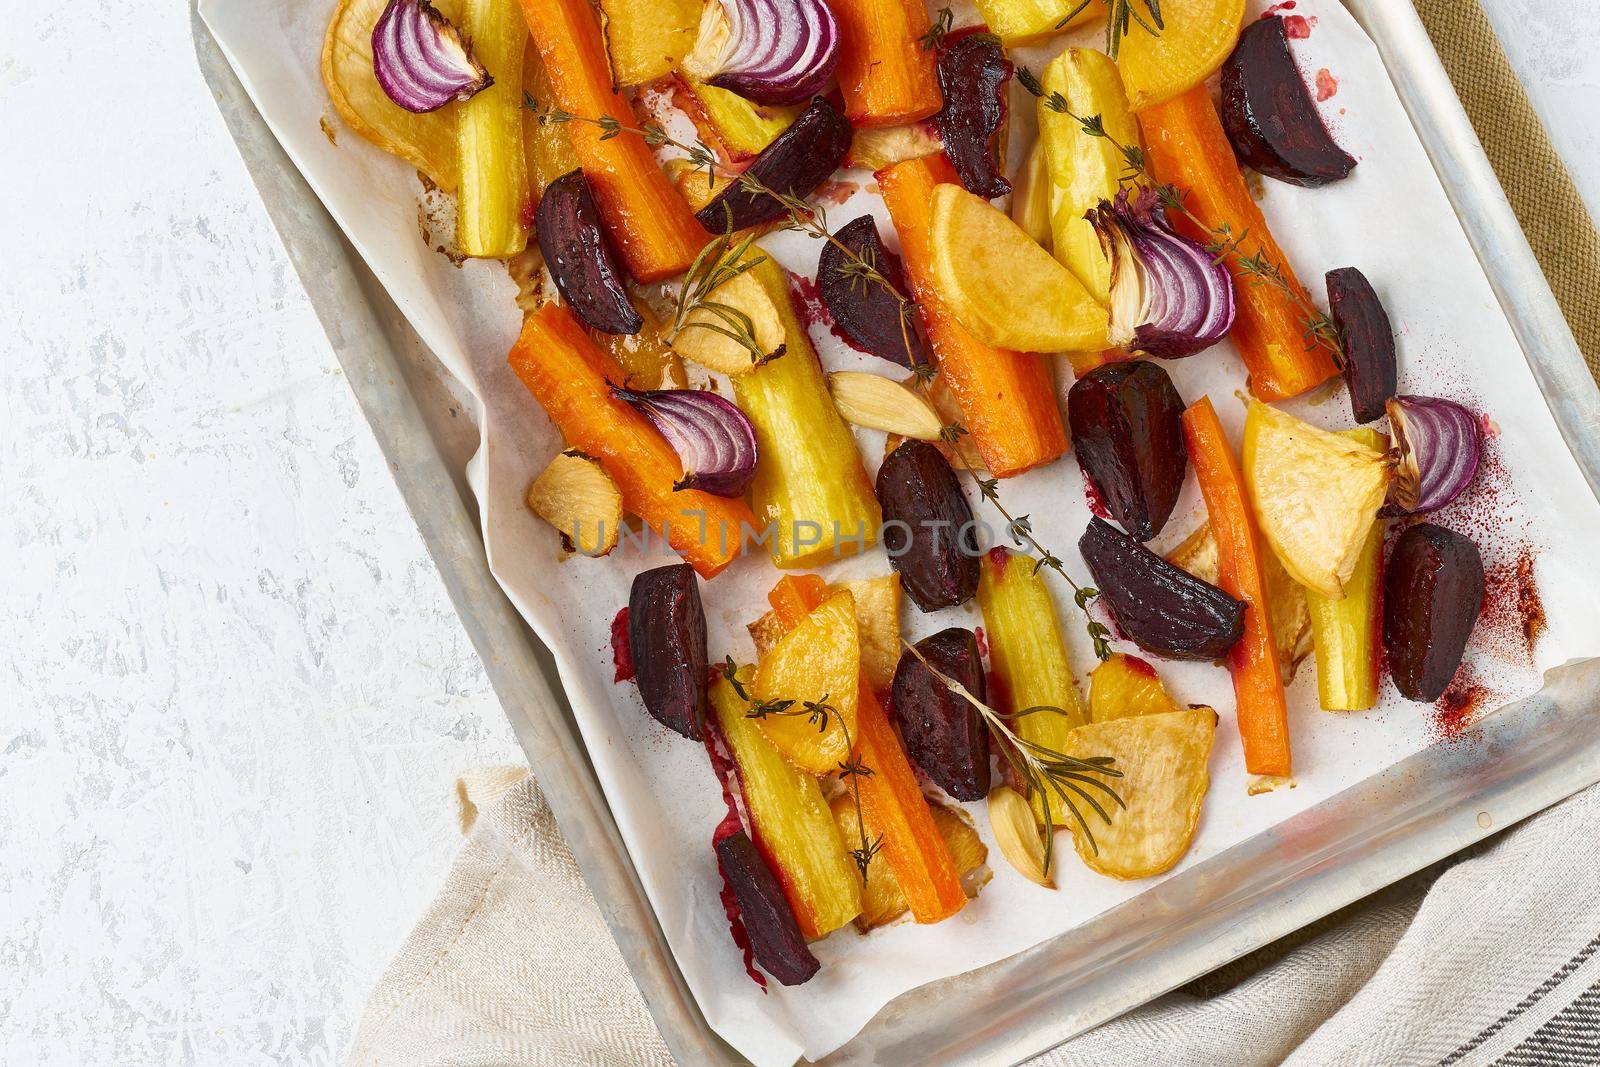 Colorful roasted vegetables on tray with parchment. Mix of carrots, beets, turnips by NataBene